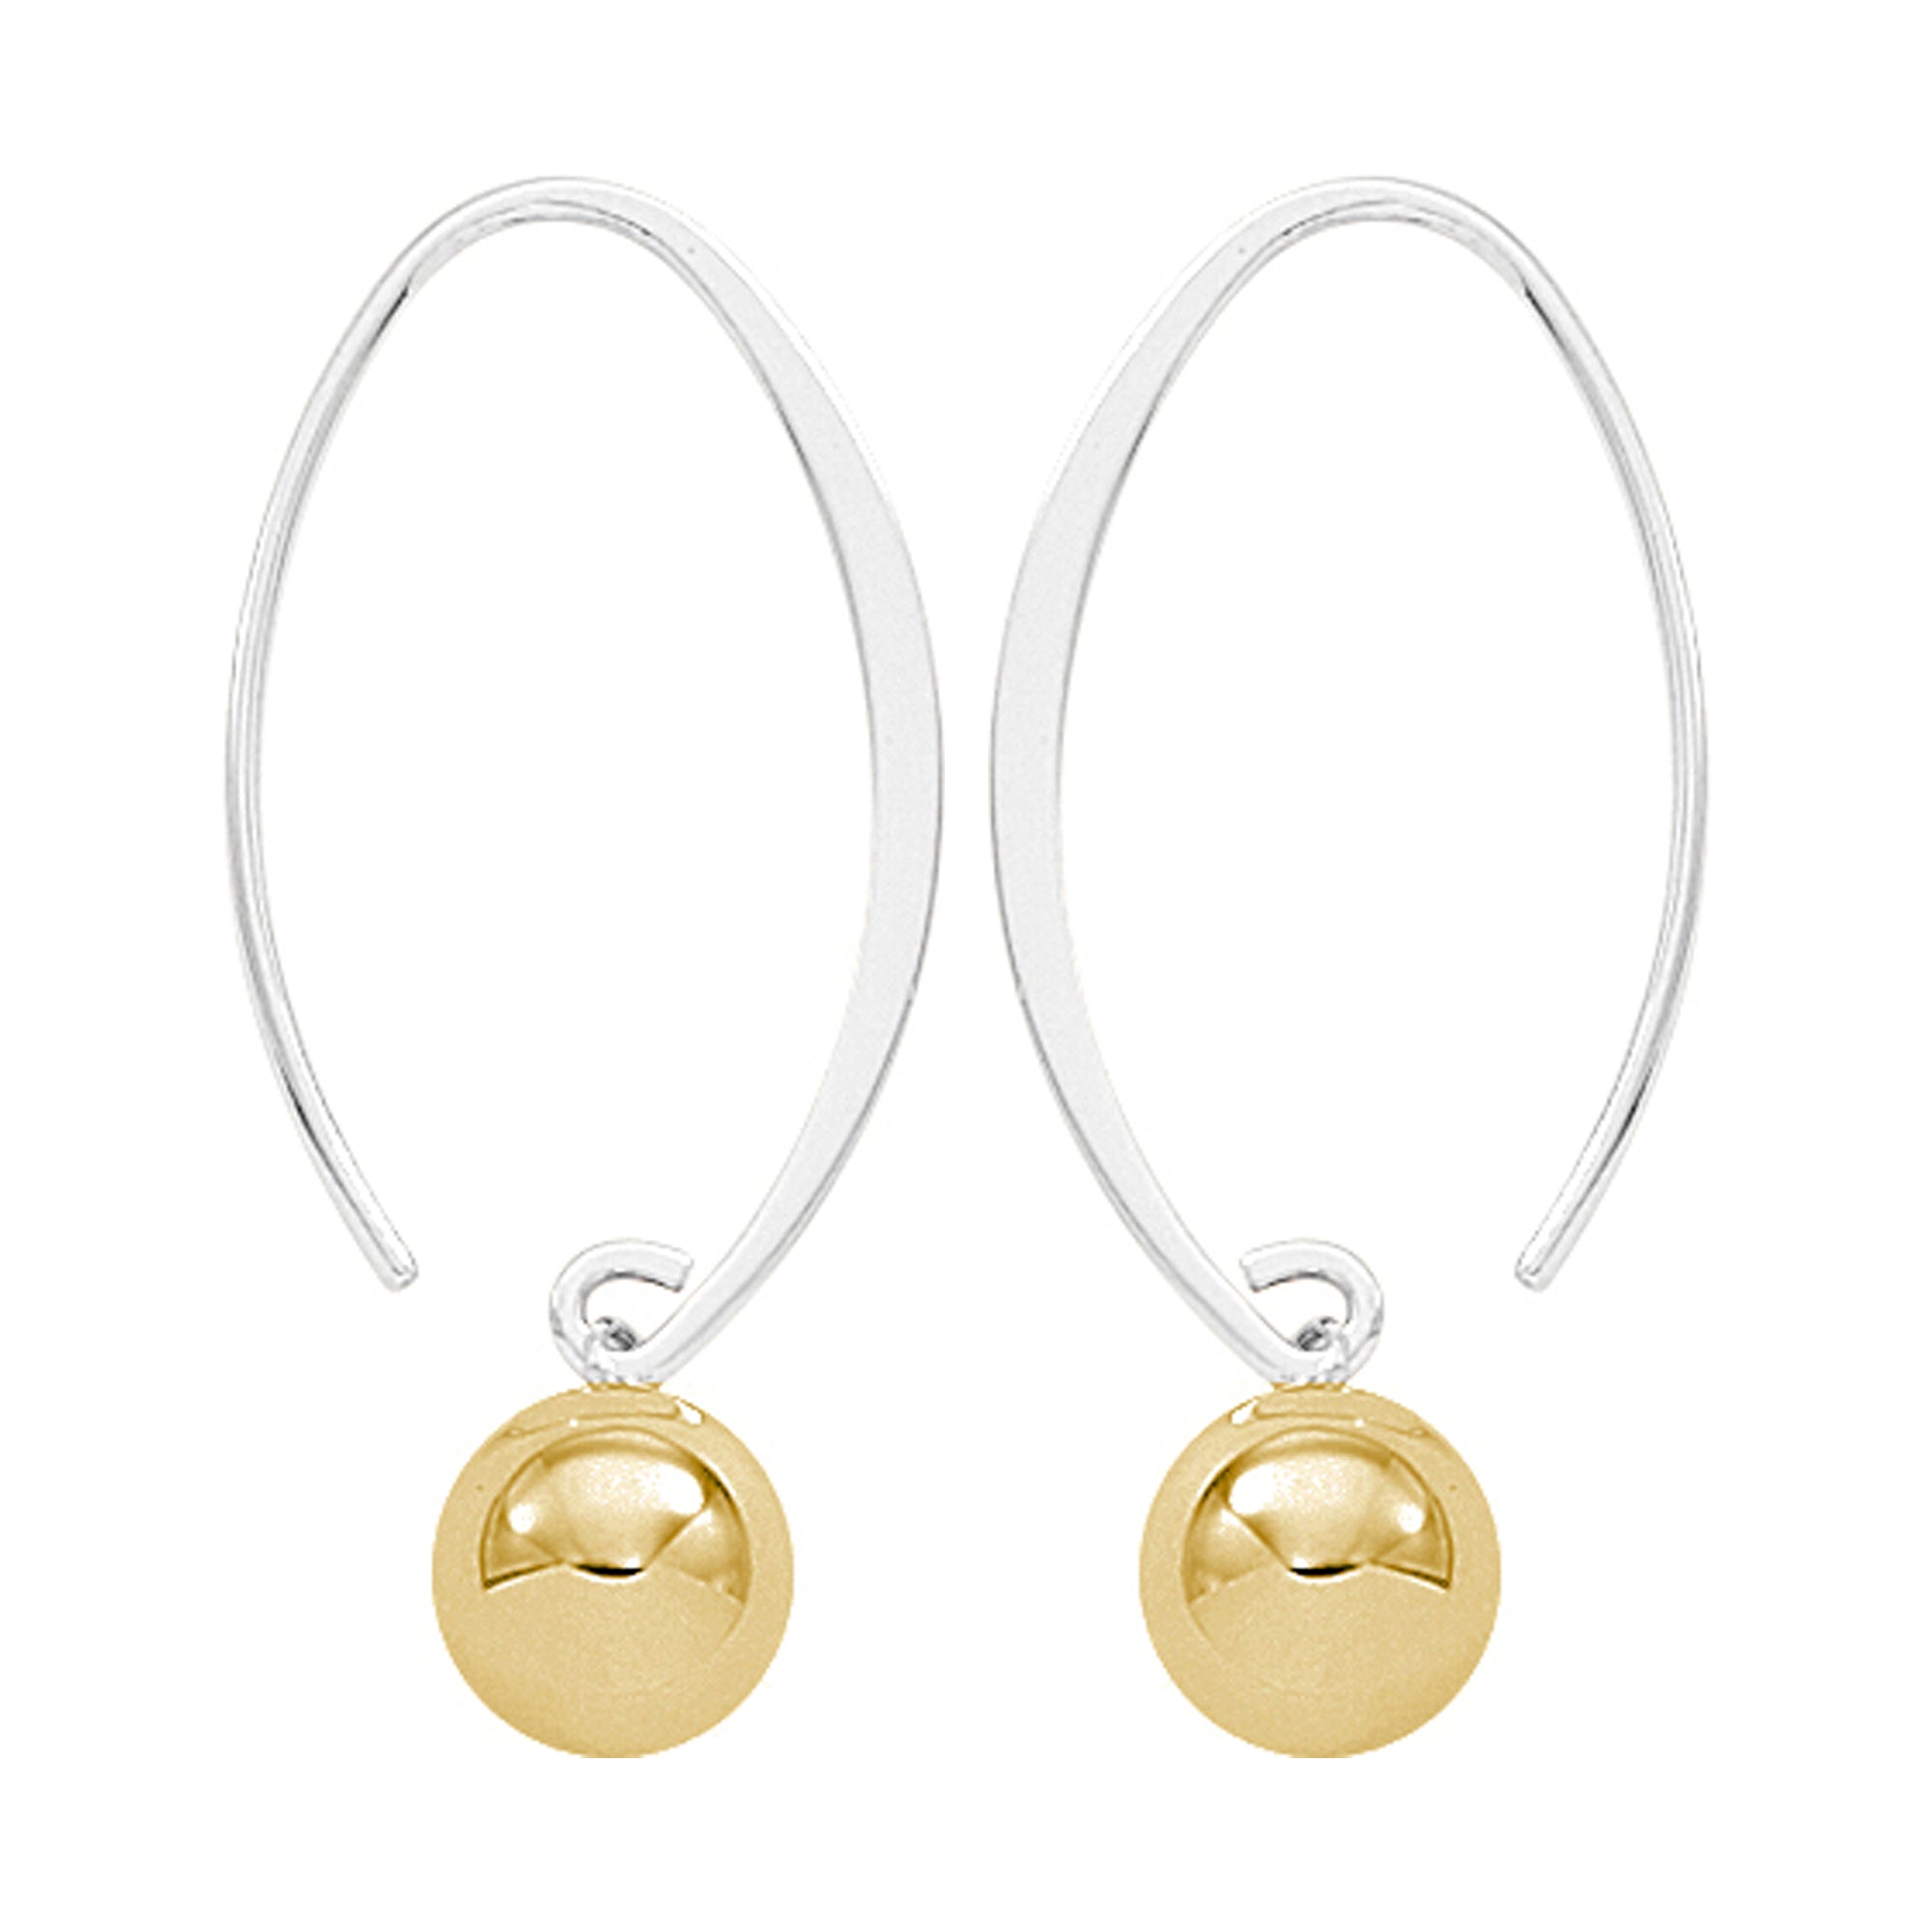 Sterling Silver and 14k Yellow Gold Ball Earrings